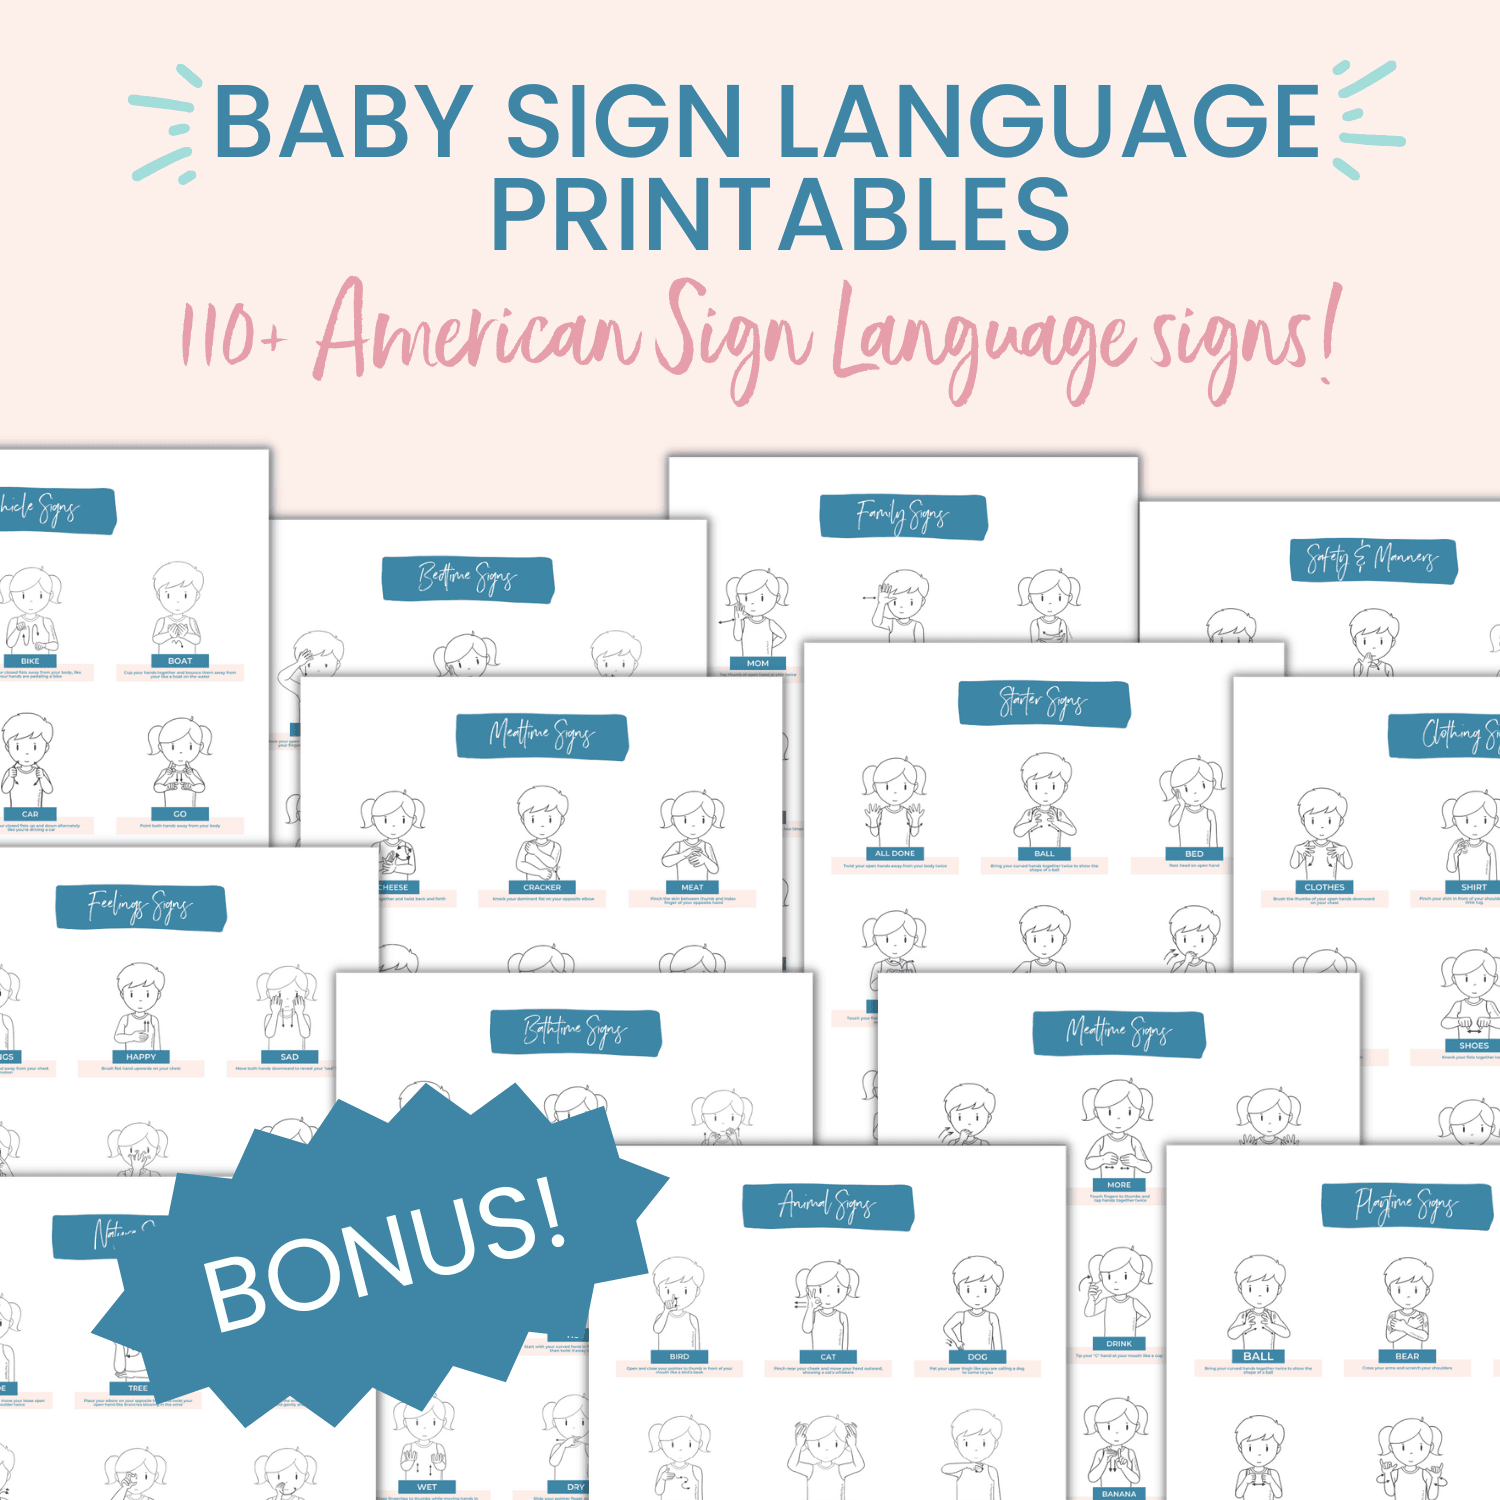 The Baby Sign Roadmap Course